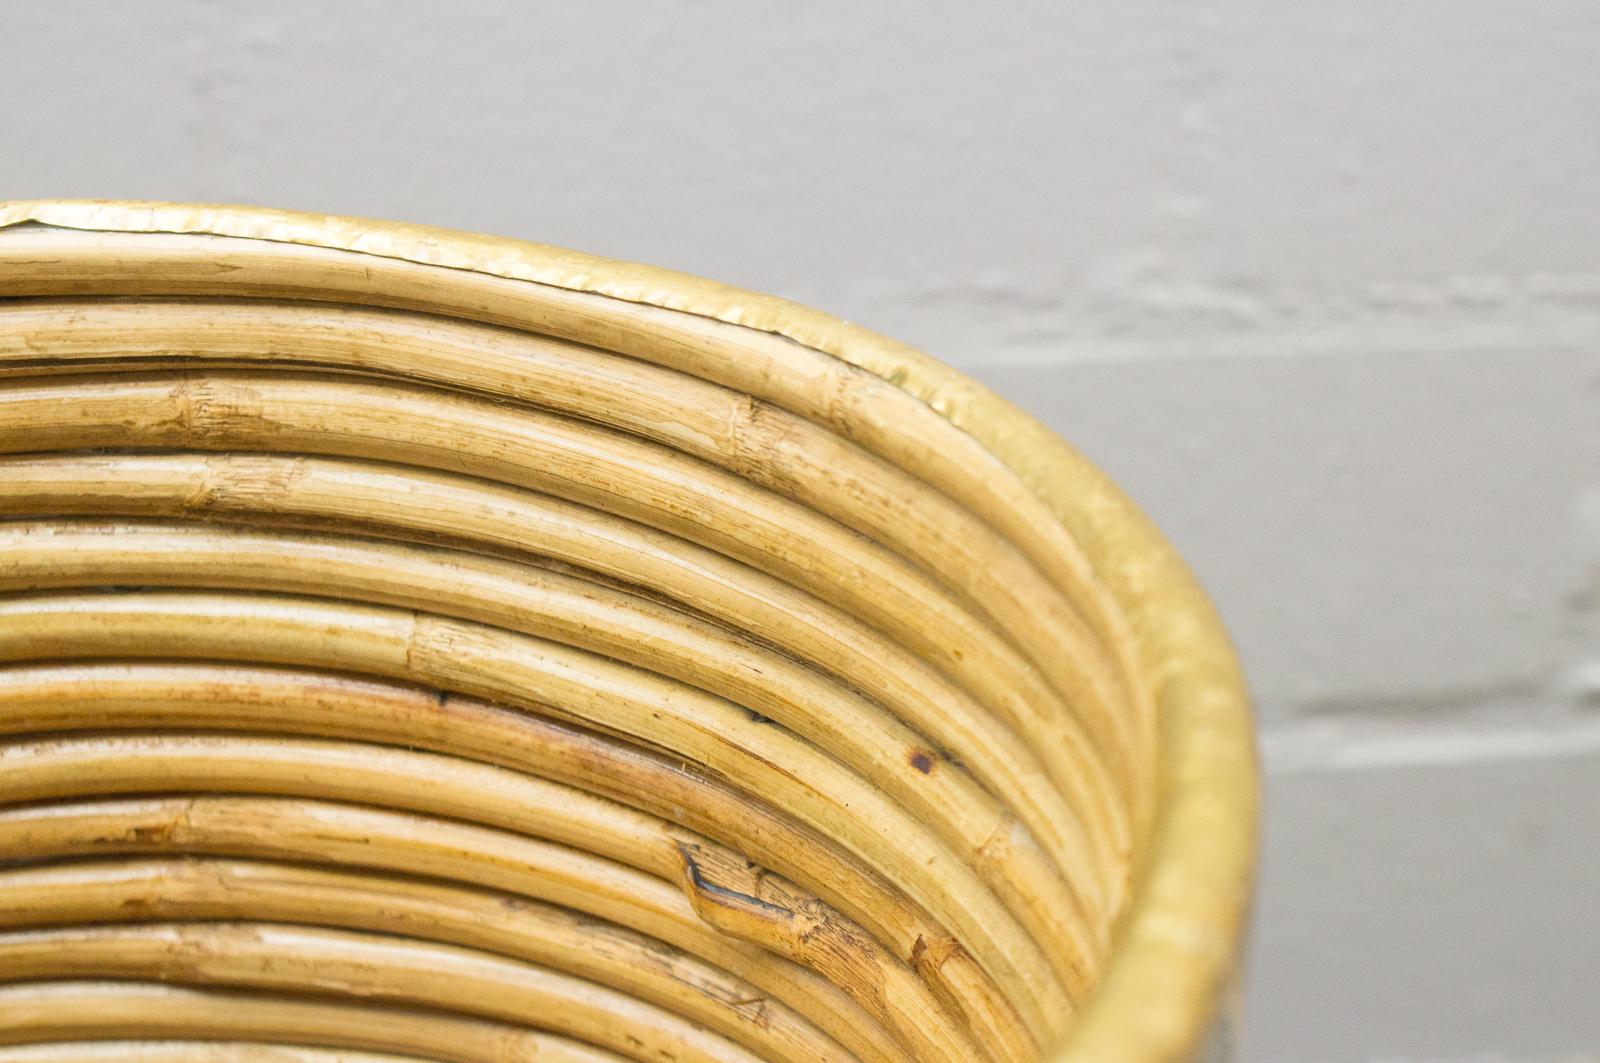 Rattan and Brass Midcentury Handcrafted Basket, Austria, 1950s` 1